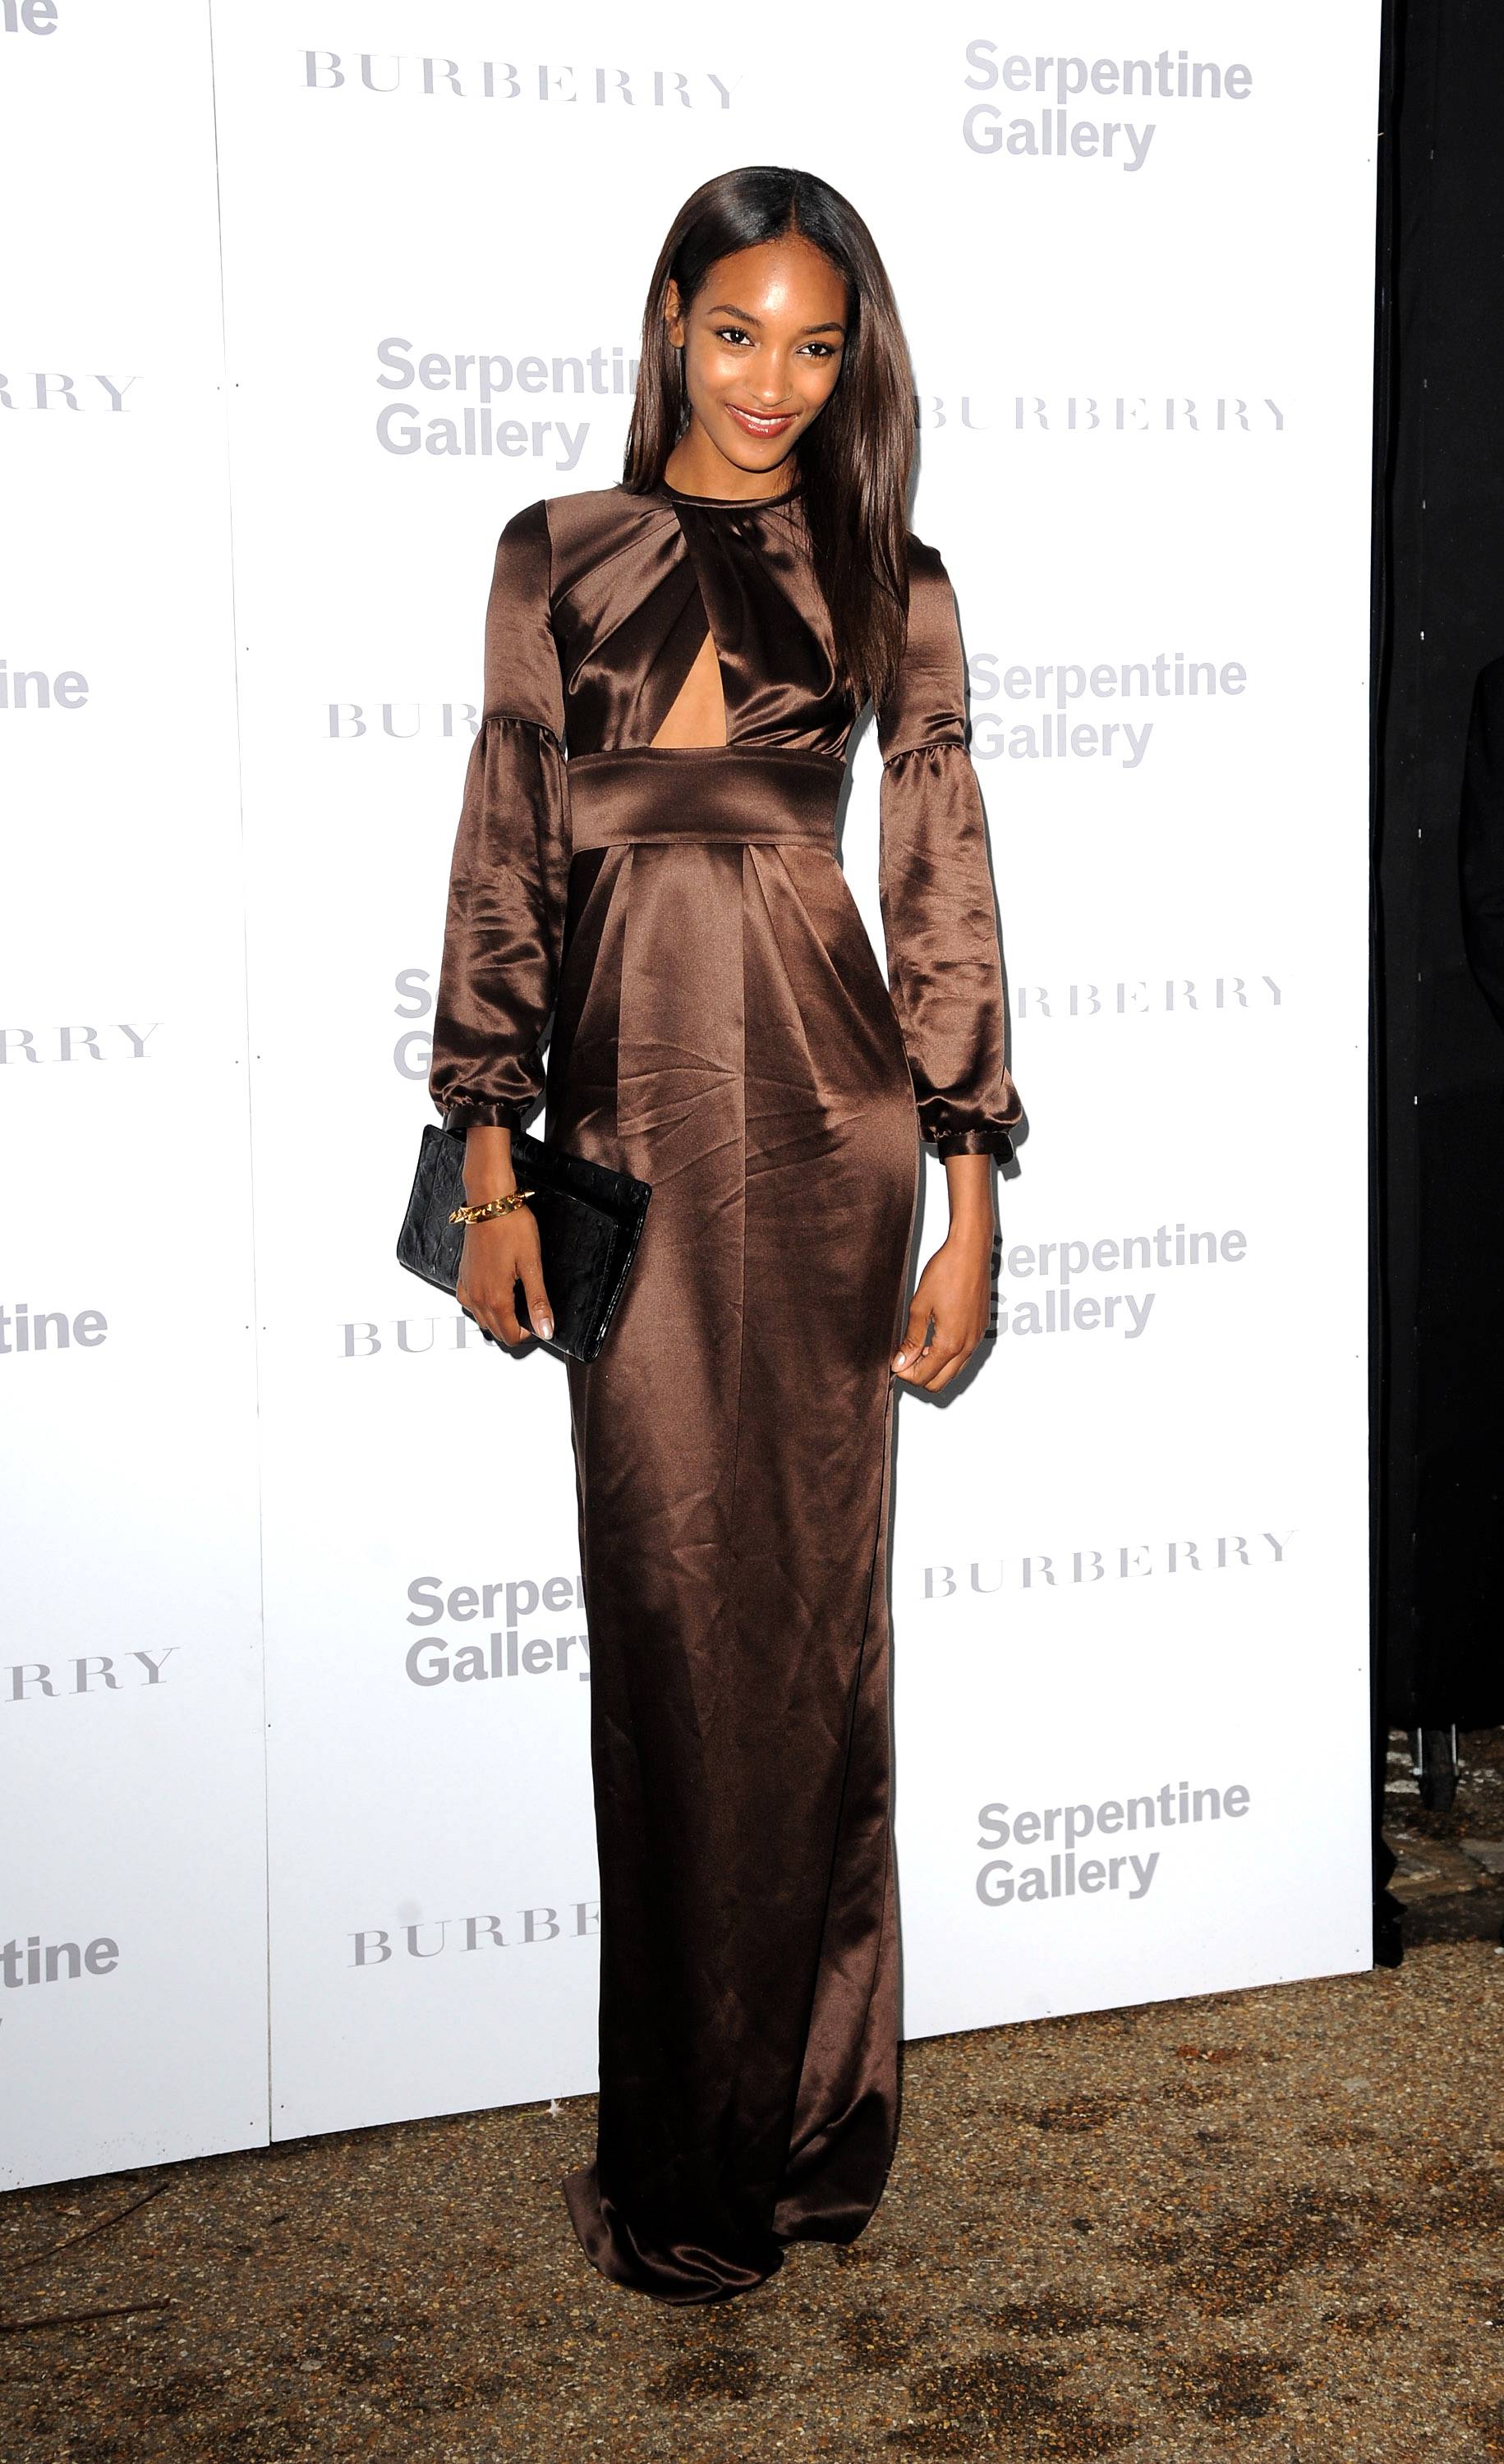 Jourdan Dunn - The hot model complimented her glowing skin in this mocha Burberry dress from the Pre-Fall 2011 collection.(Photo: Eamonn McCormack/Getty Images for Burberry)